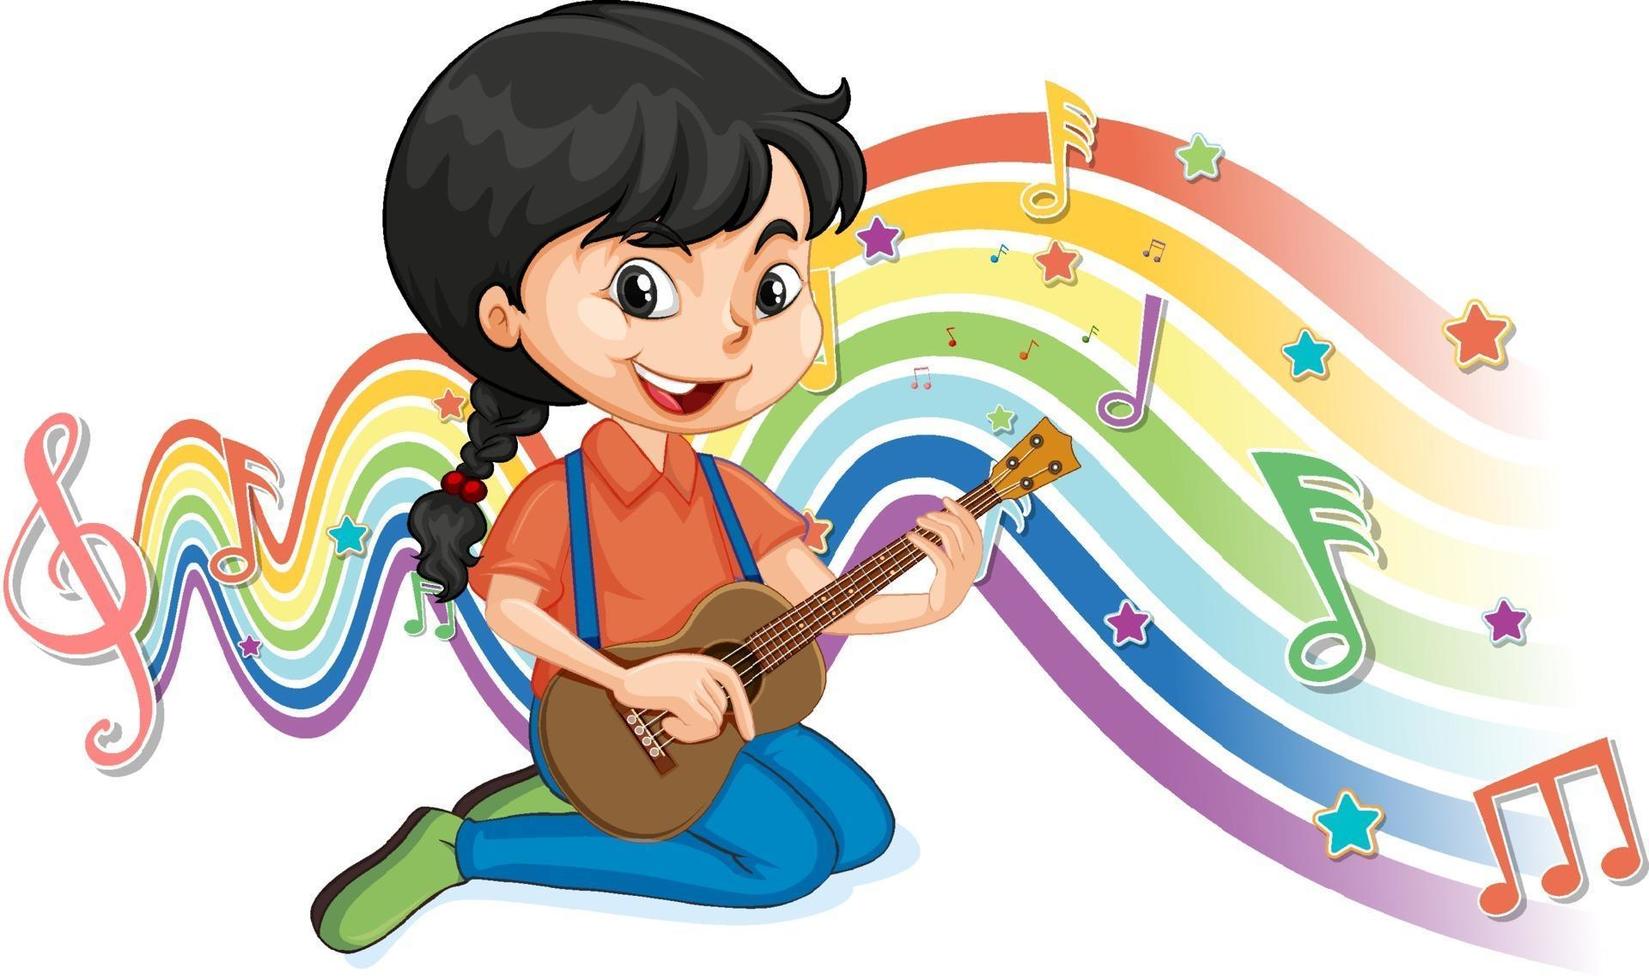 Girl playing guitar with melody symbols on rainbow wave vector